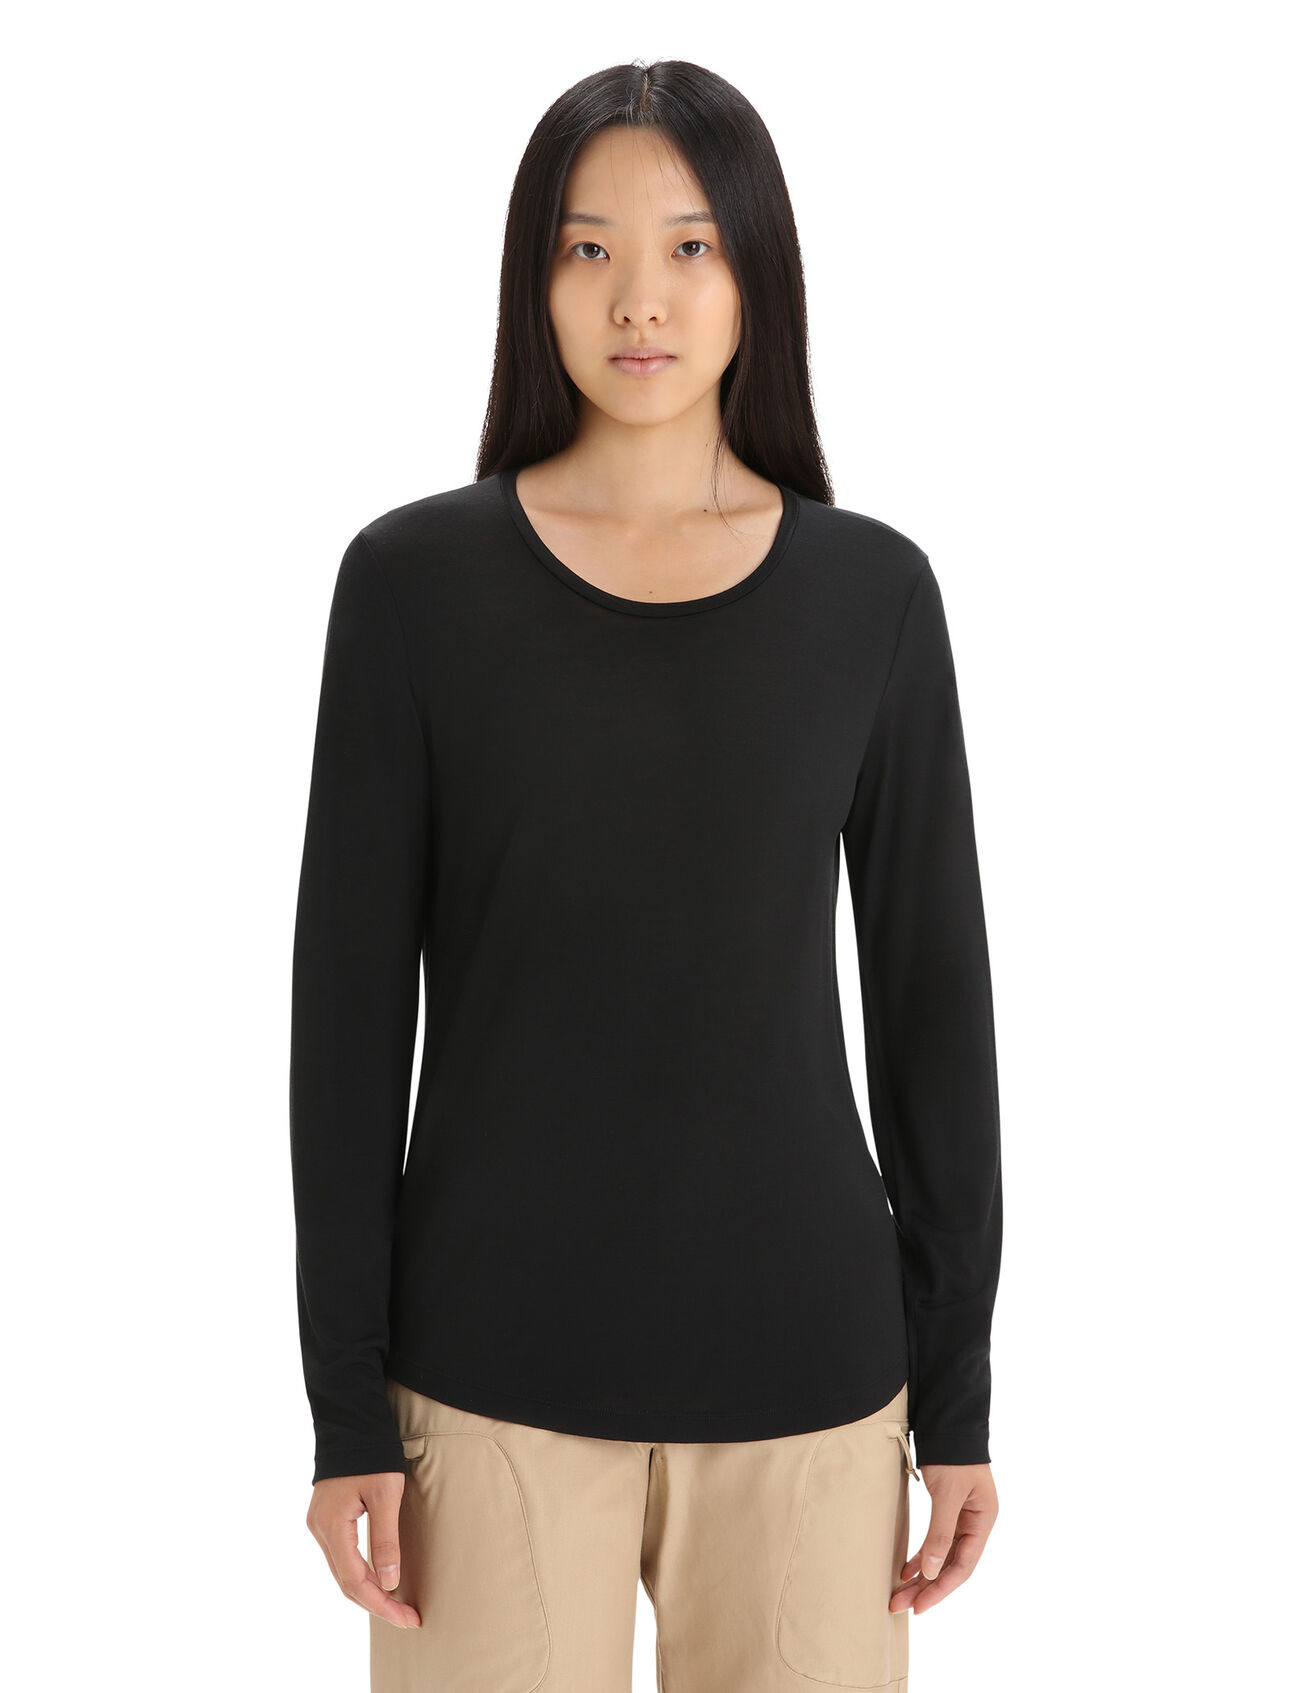 Womens Merino Sphere II Long Sleeve T-Shirt A soft merino-blend tee made with our lightweight Cool-Lite™ jersey fabric, the Sphere II Long Sleeve Tee provides natural breathability, odor resistance and comfort.